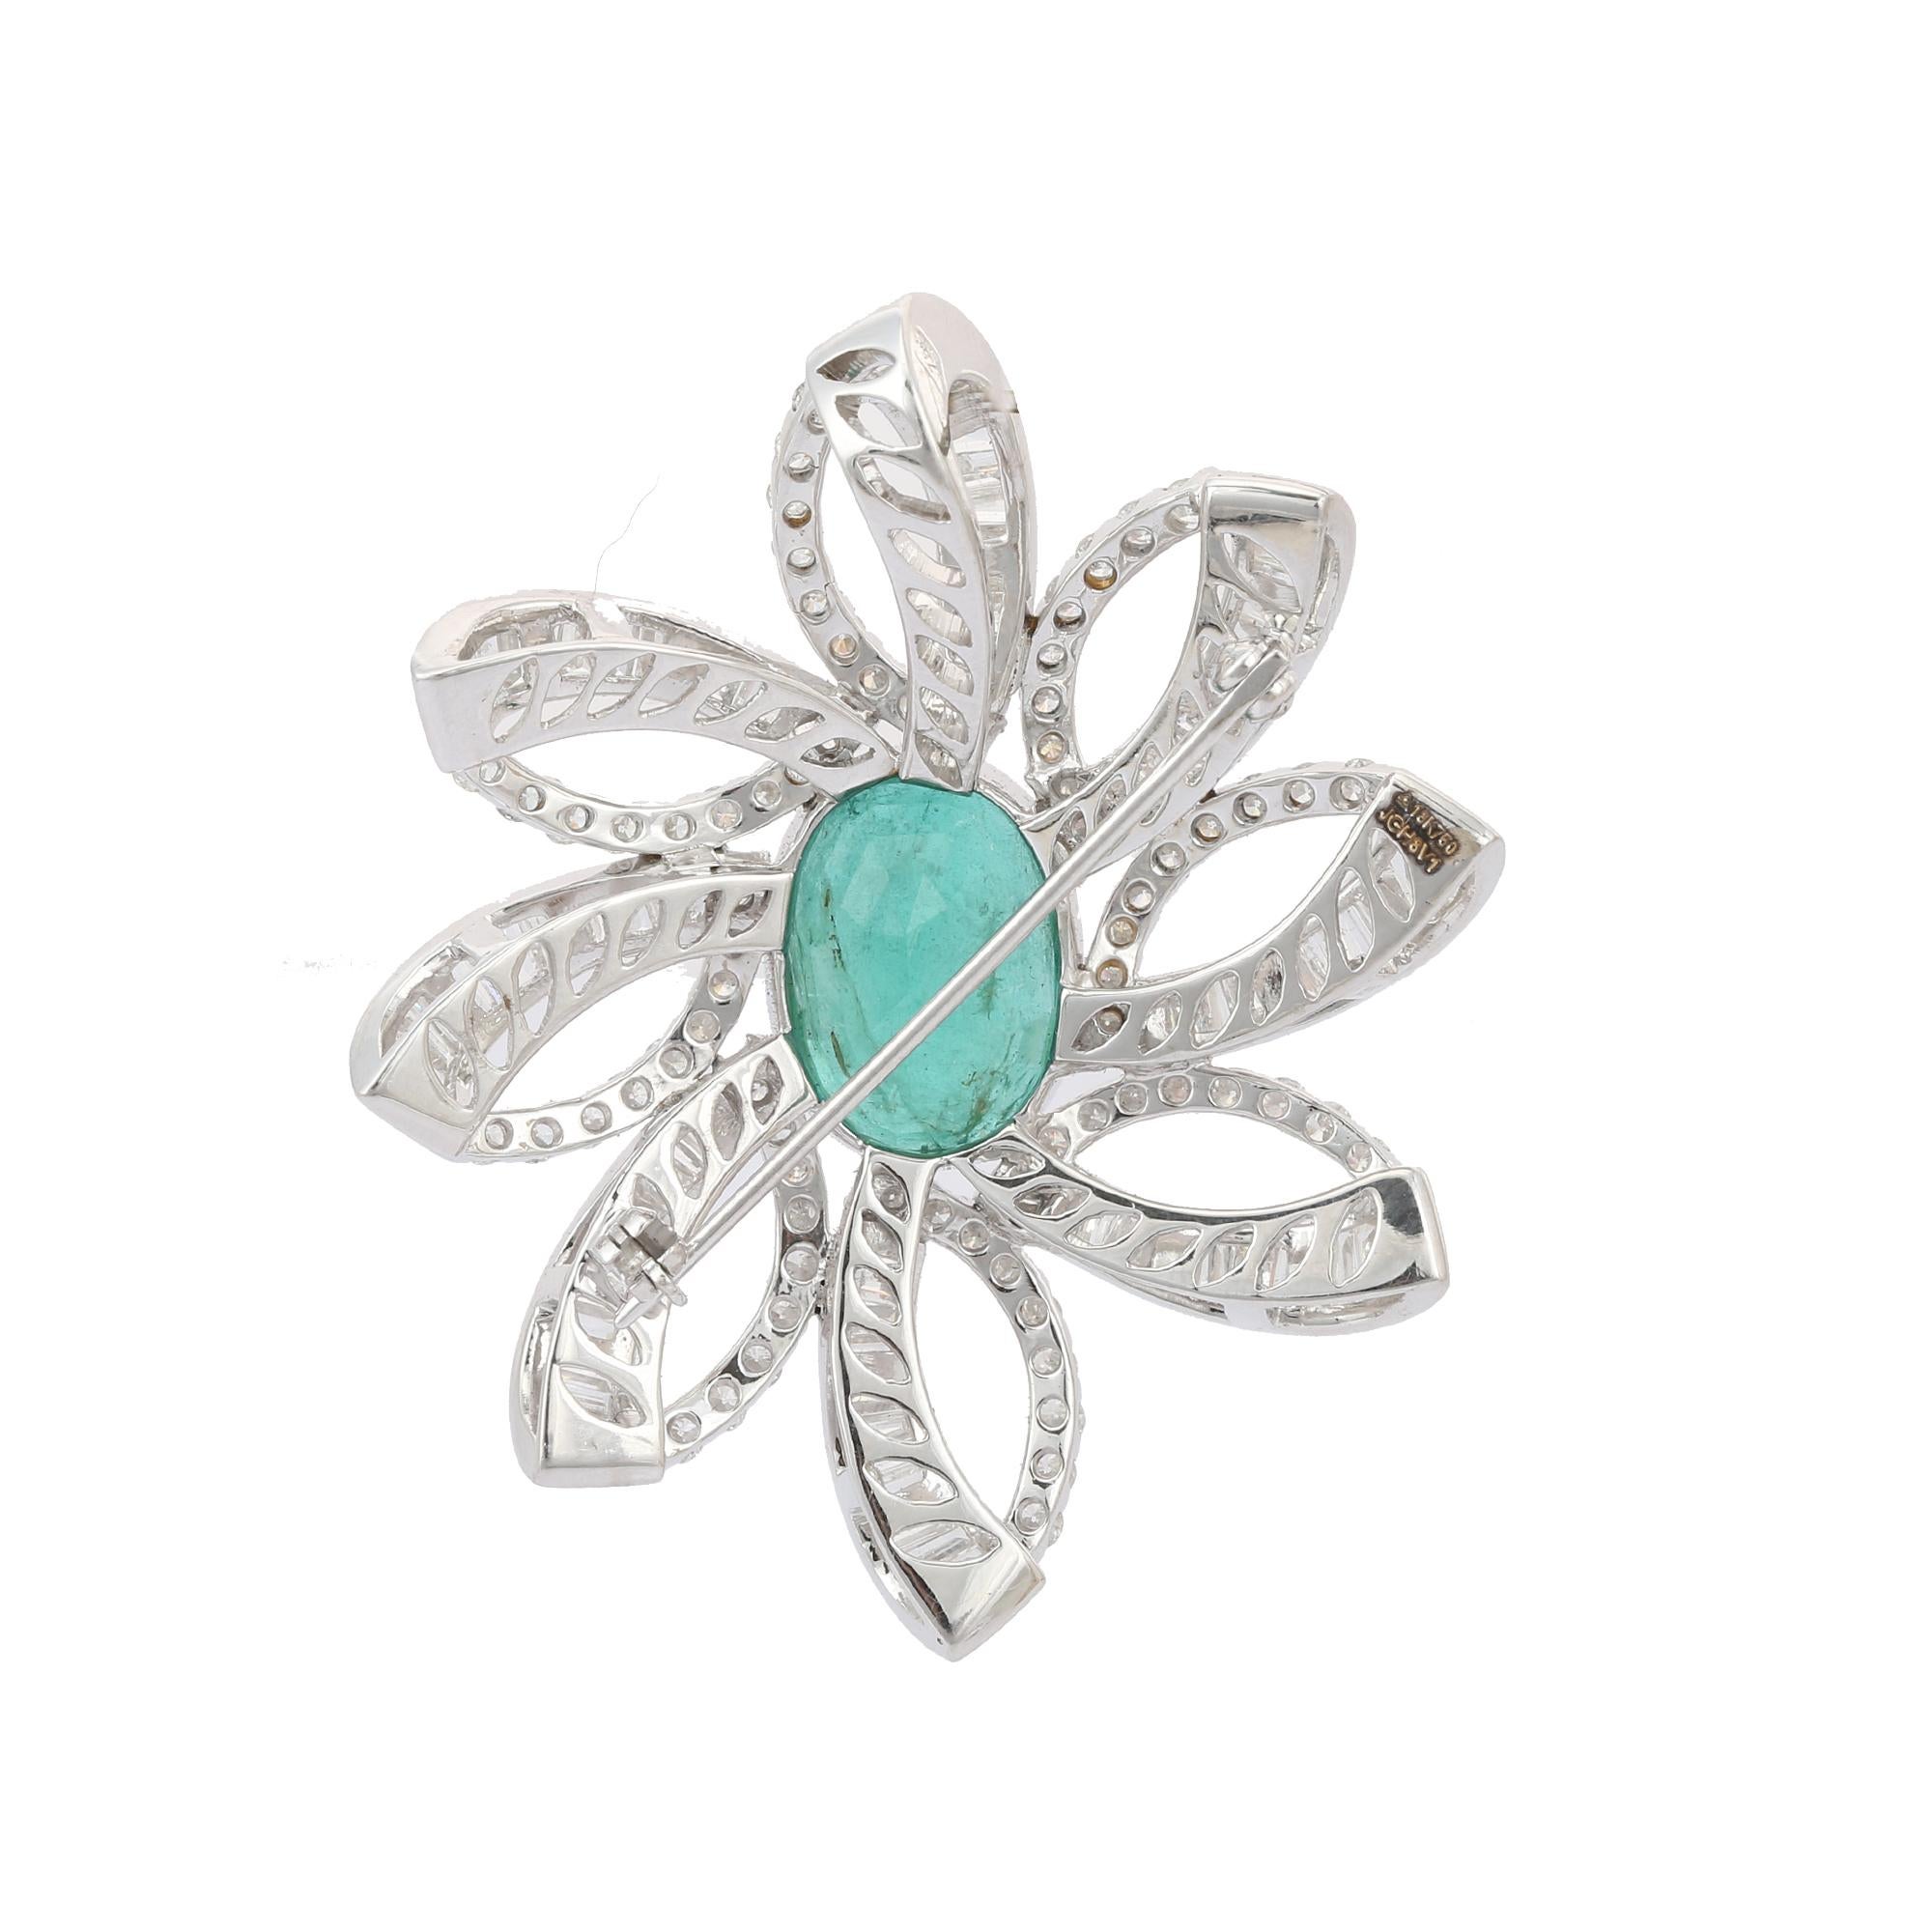  18k Solid White Gold Diamond and 7.5 Carats Emerald Blooming Floral Brooch For Sale 1